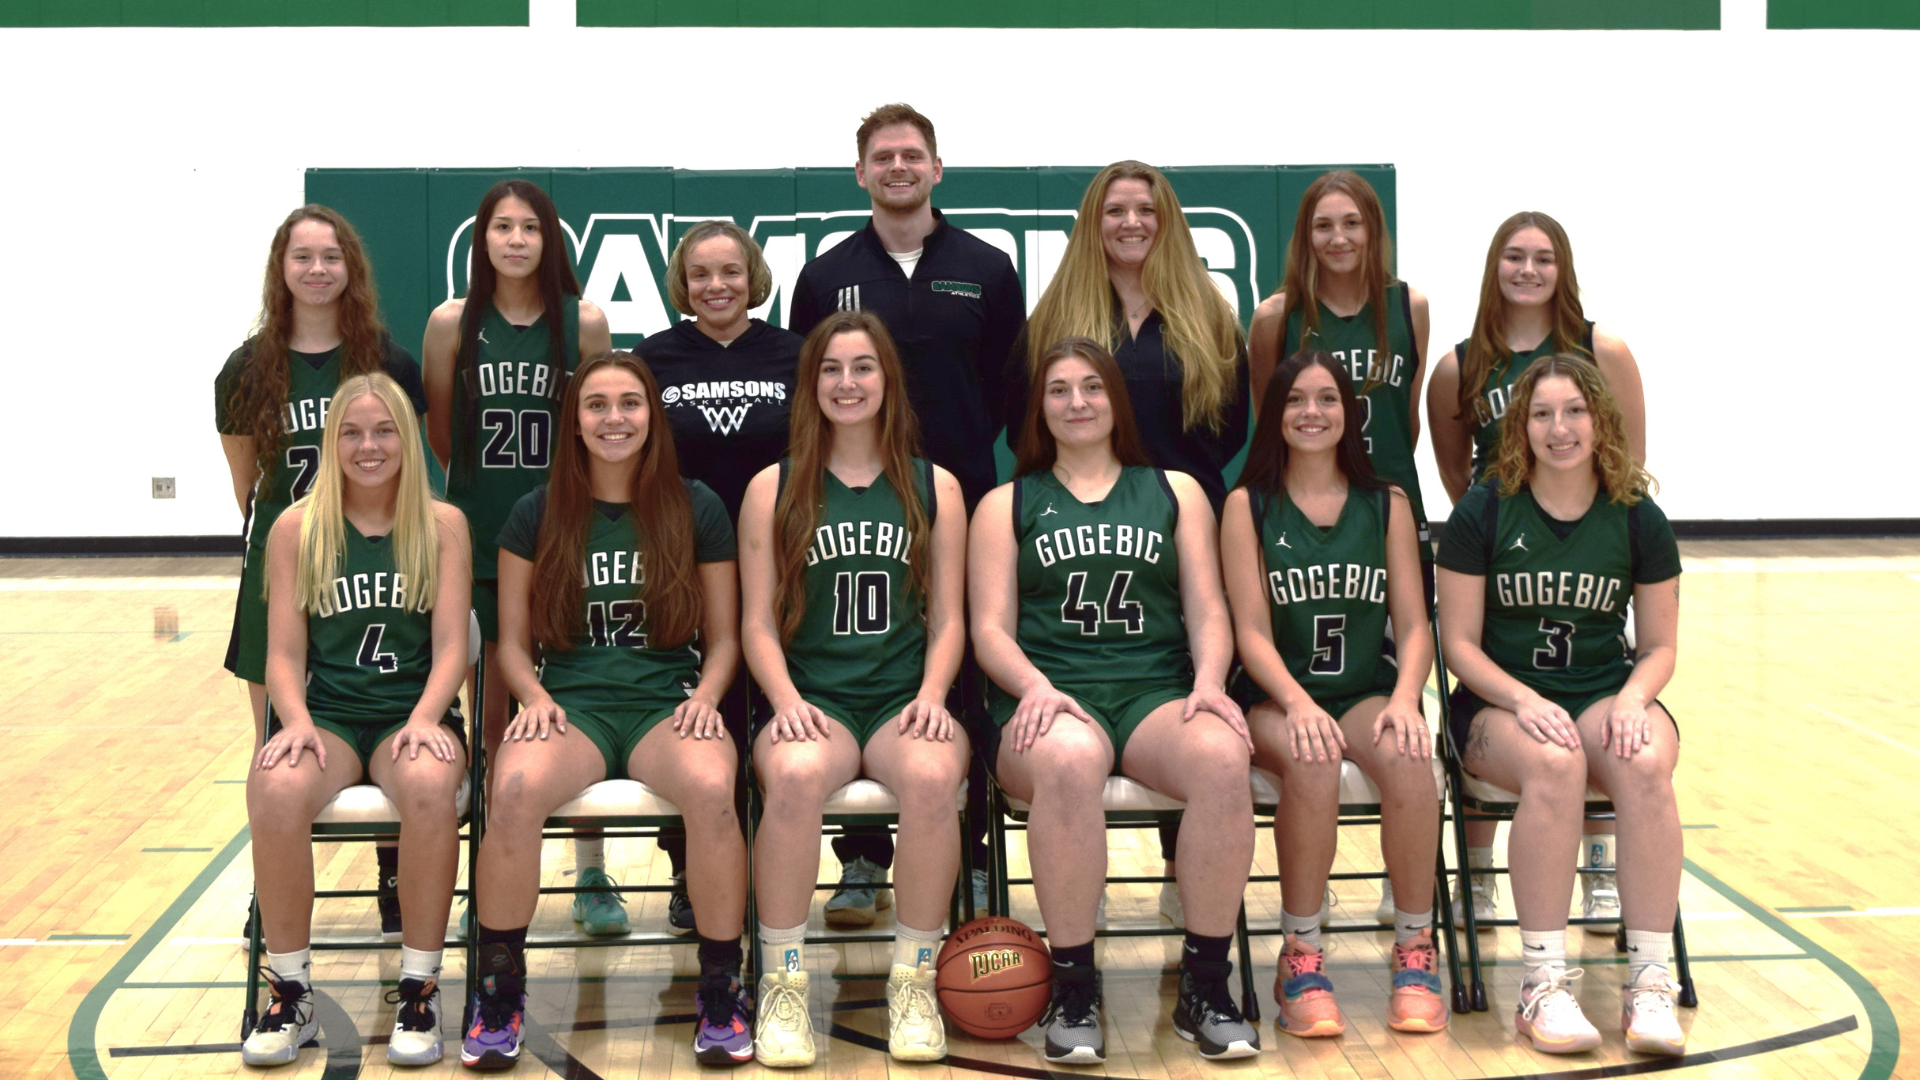 Women basketball players sitting in chairs and standing, in a team photo with a basketball at their feet.